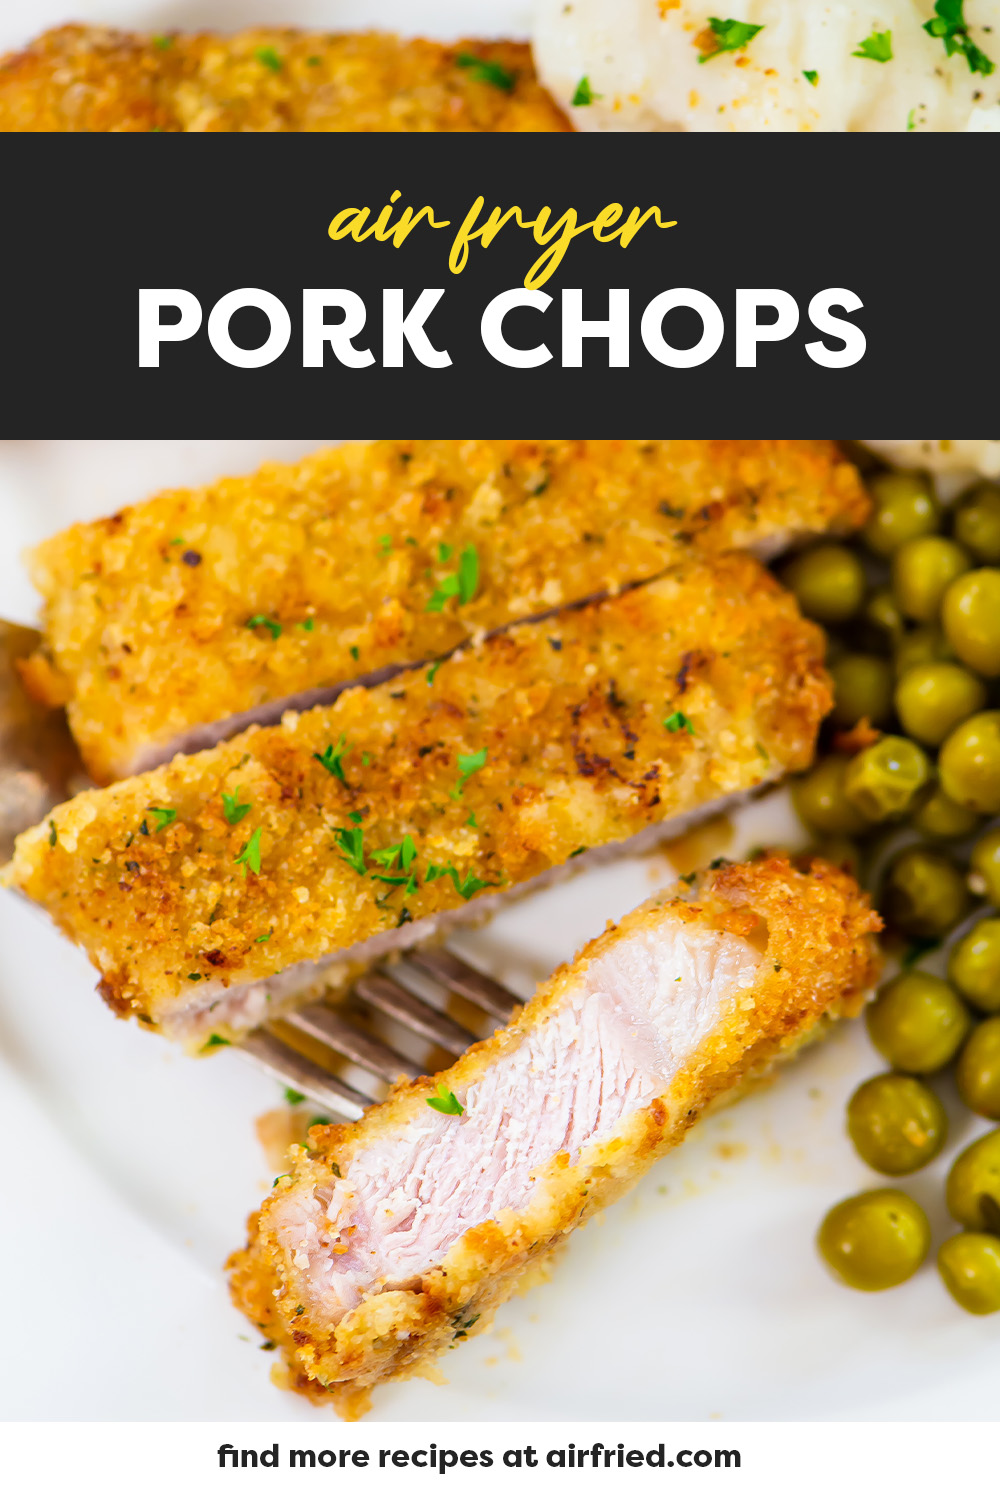 These breaded pork chops have a tender center surrounded by a wonderfully crisp breading!